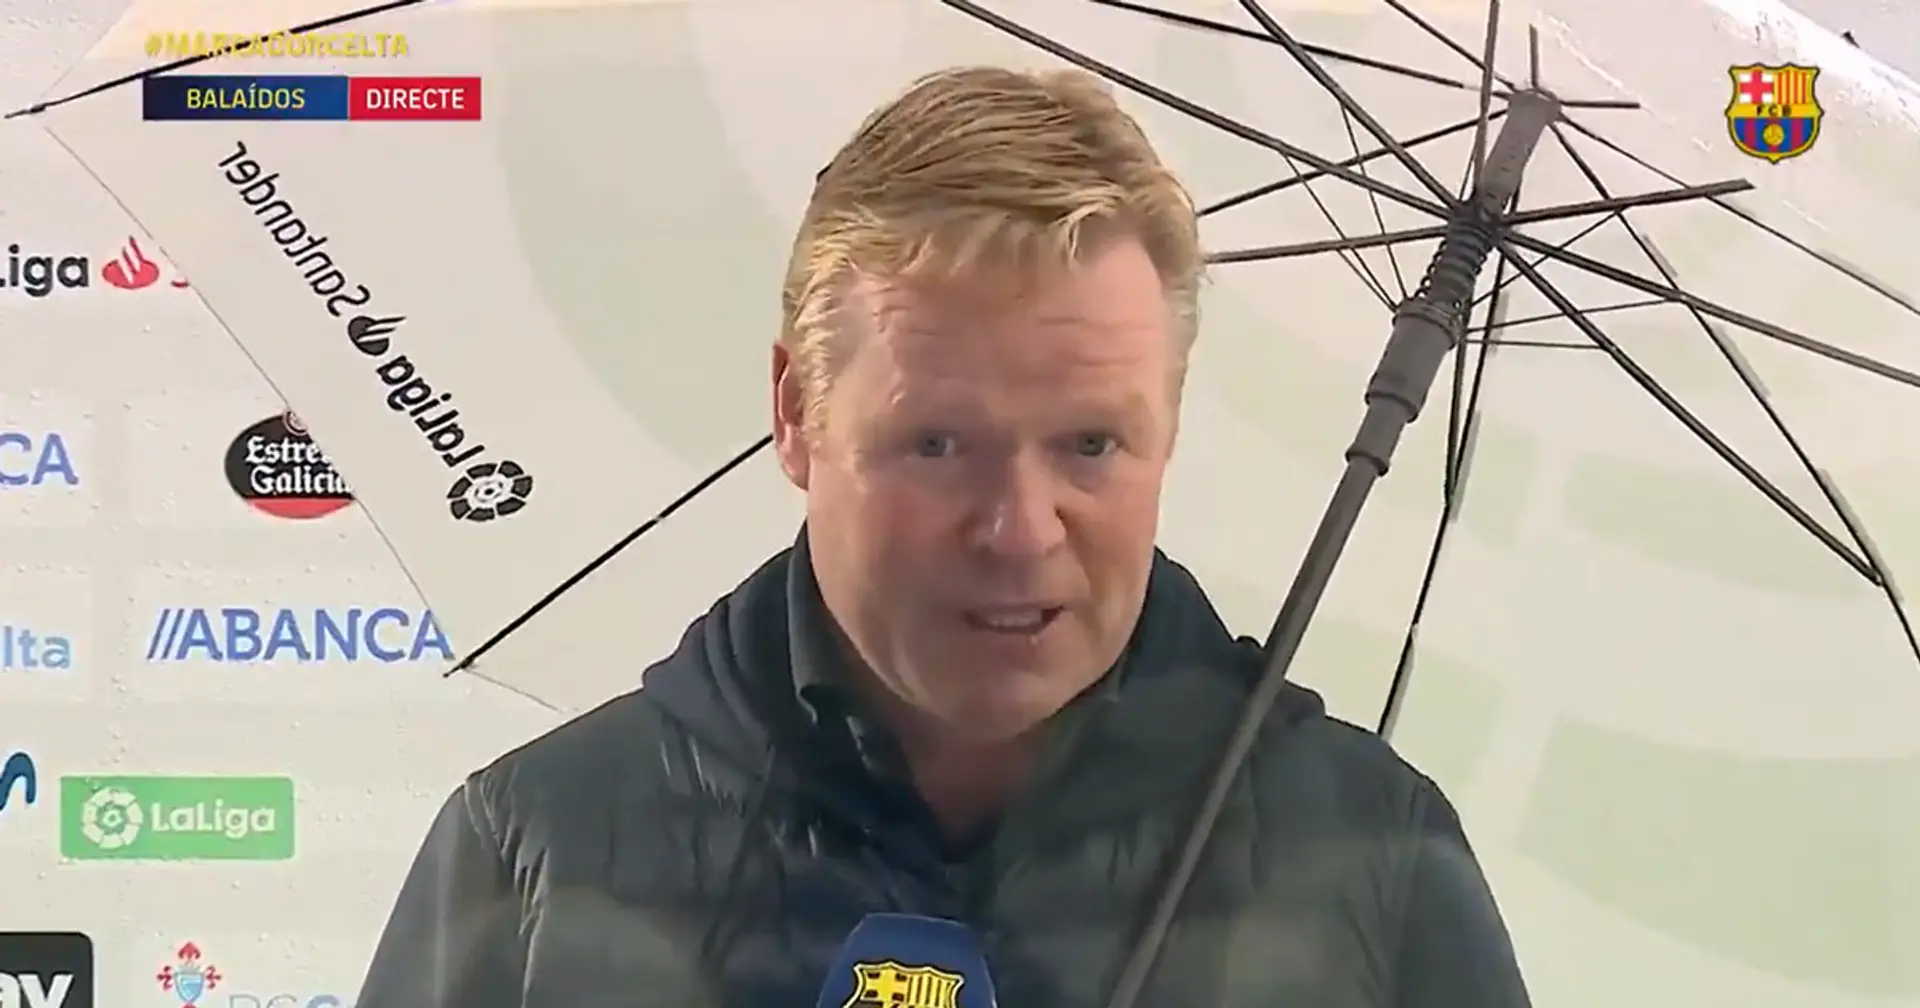 'The team is much better than you might think': Koeman refutes suggestions of Barca's dip in form